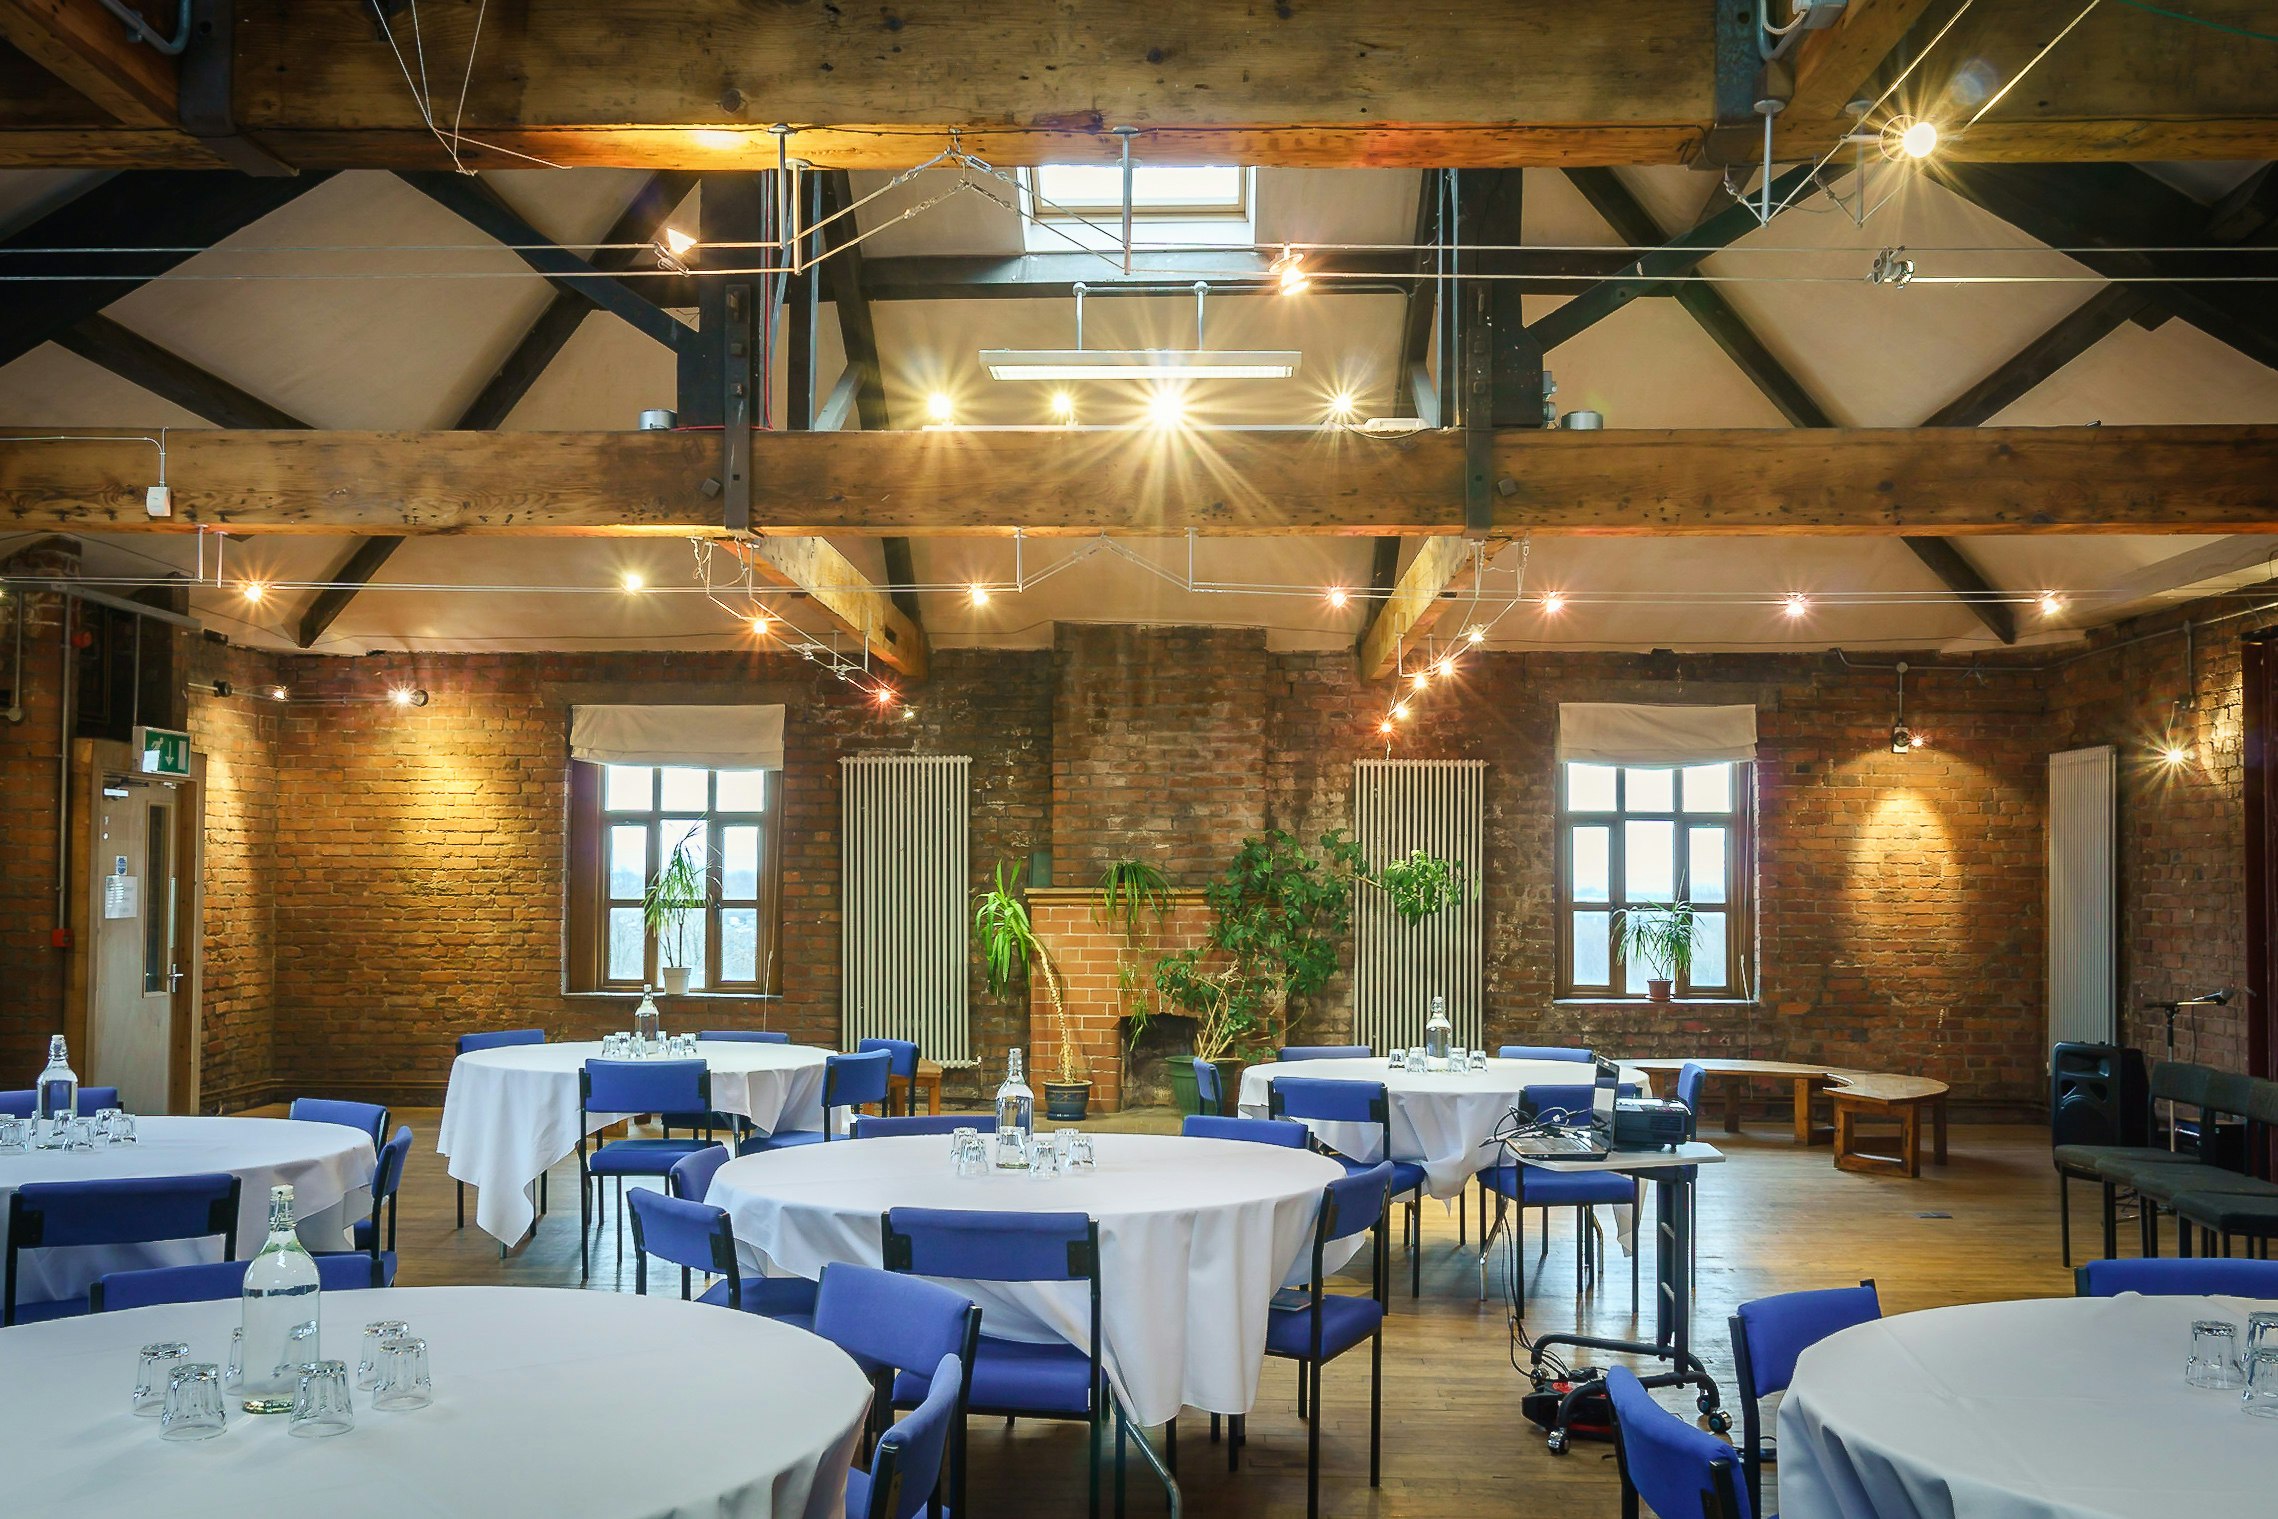 Large Party Venues in Manchester - Bridge 5 Mill